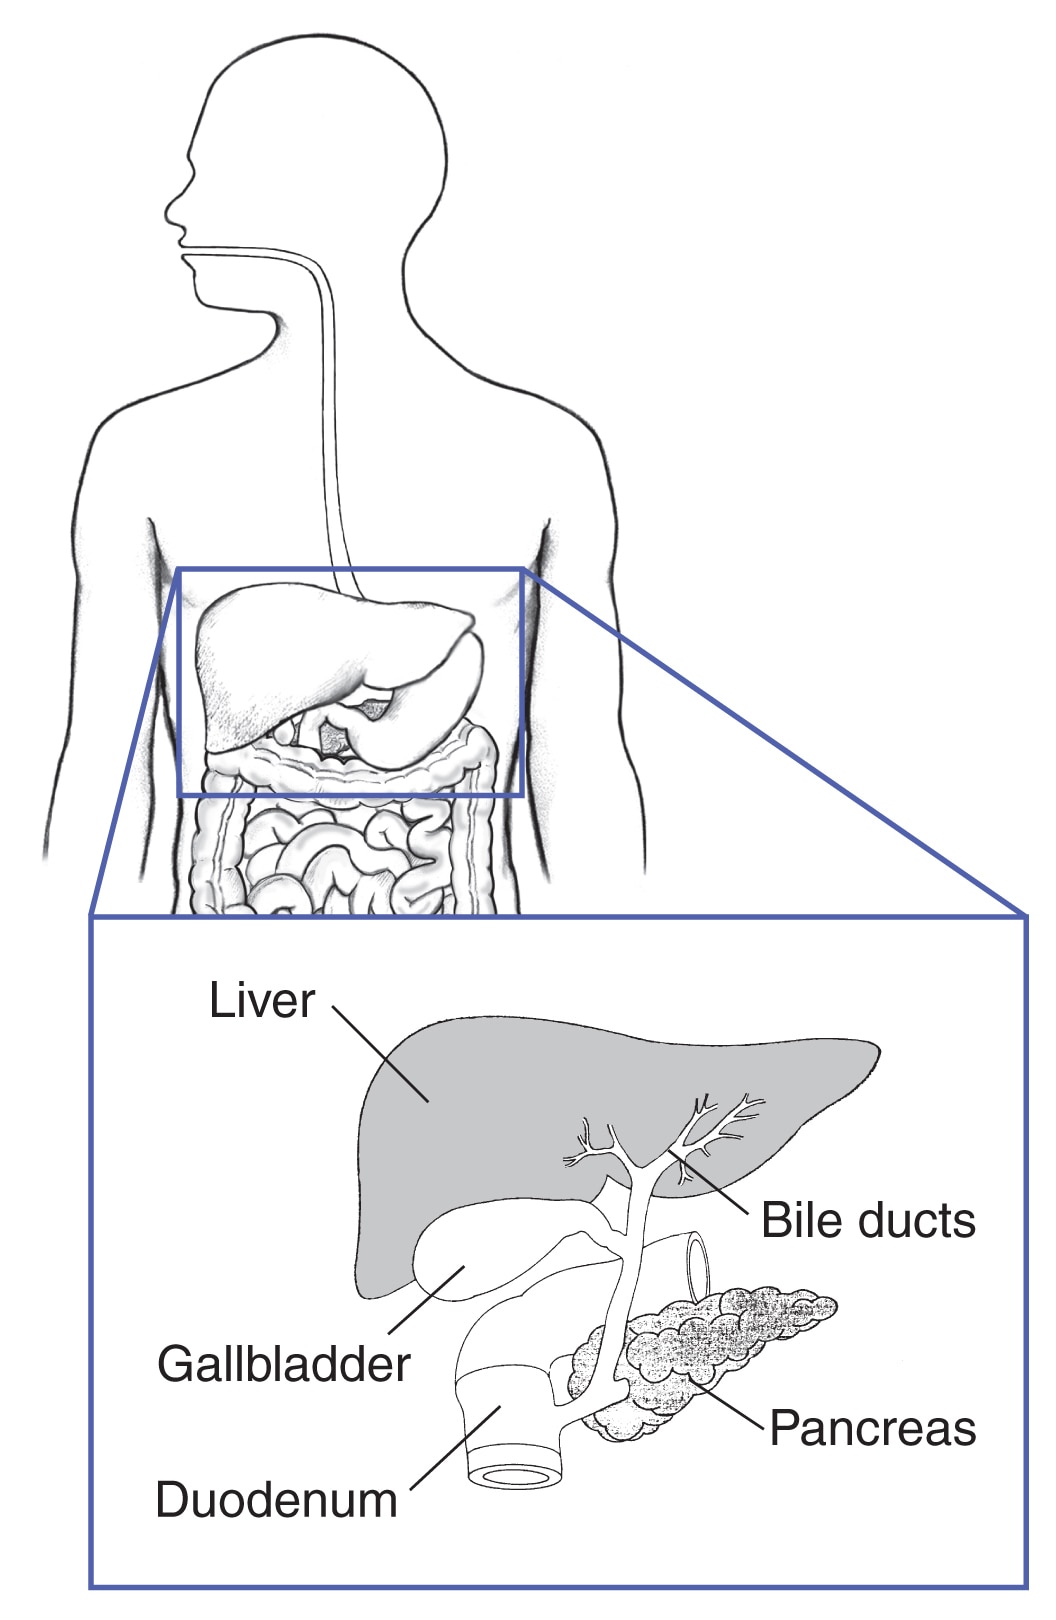 Human torso with an inset showing the liver, bile ducts, gallbladder, pancreas, and duodenum.